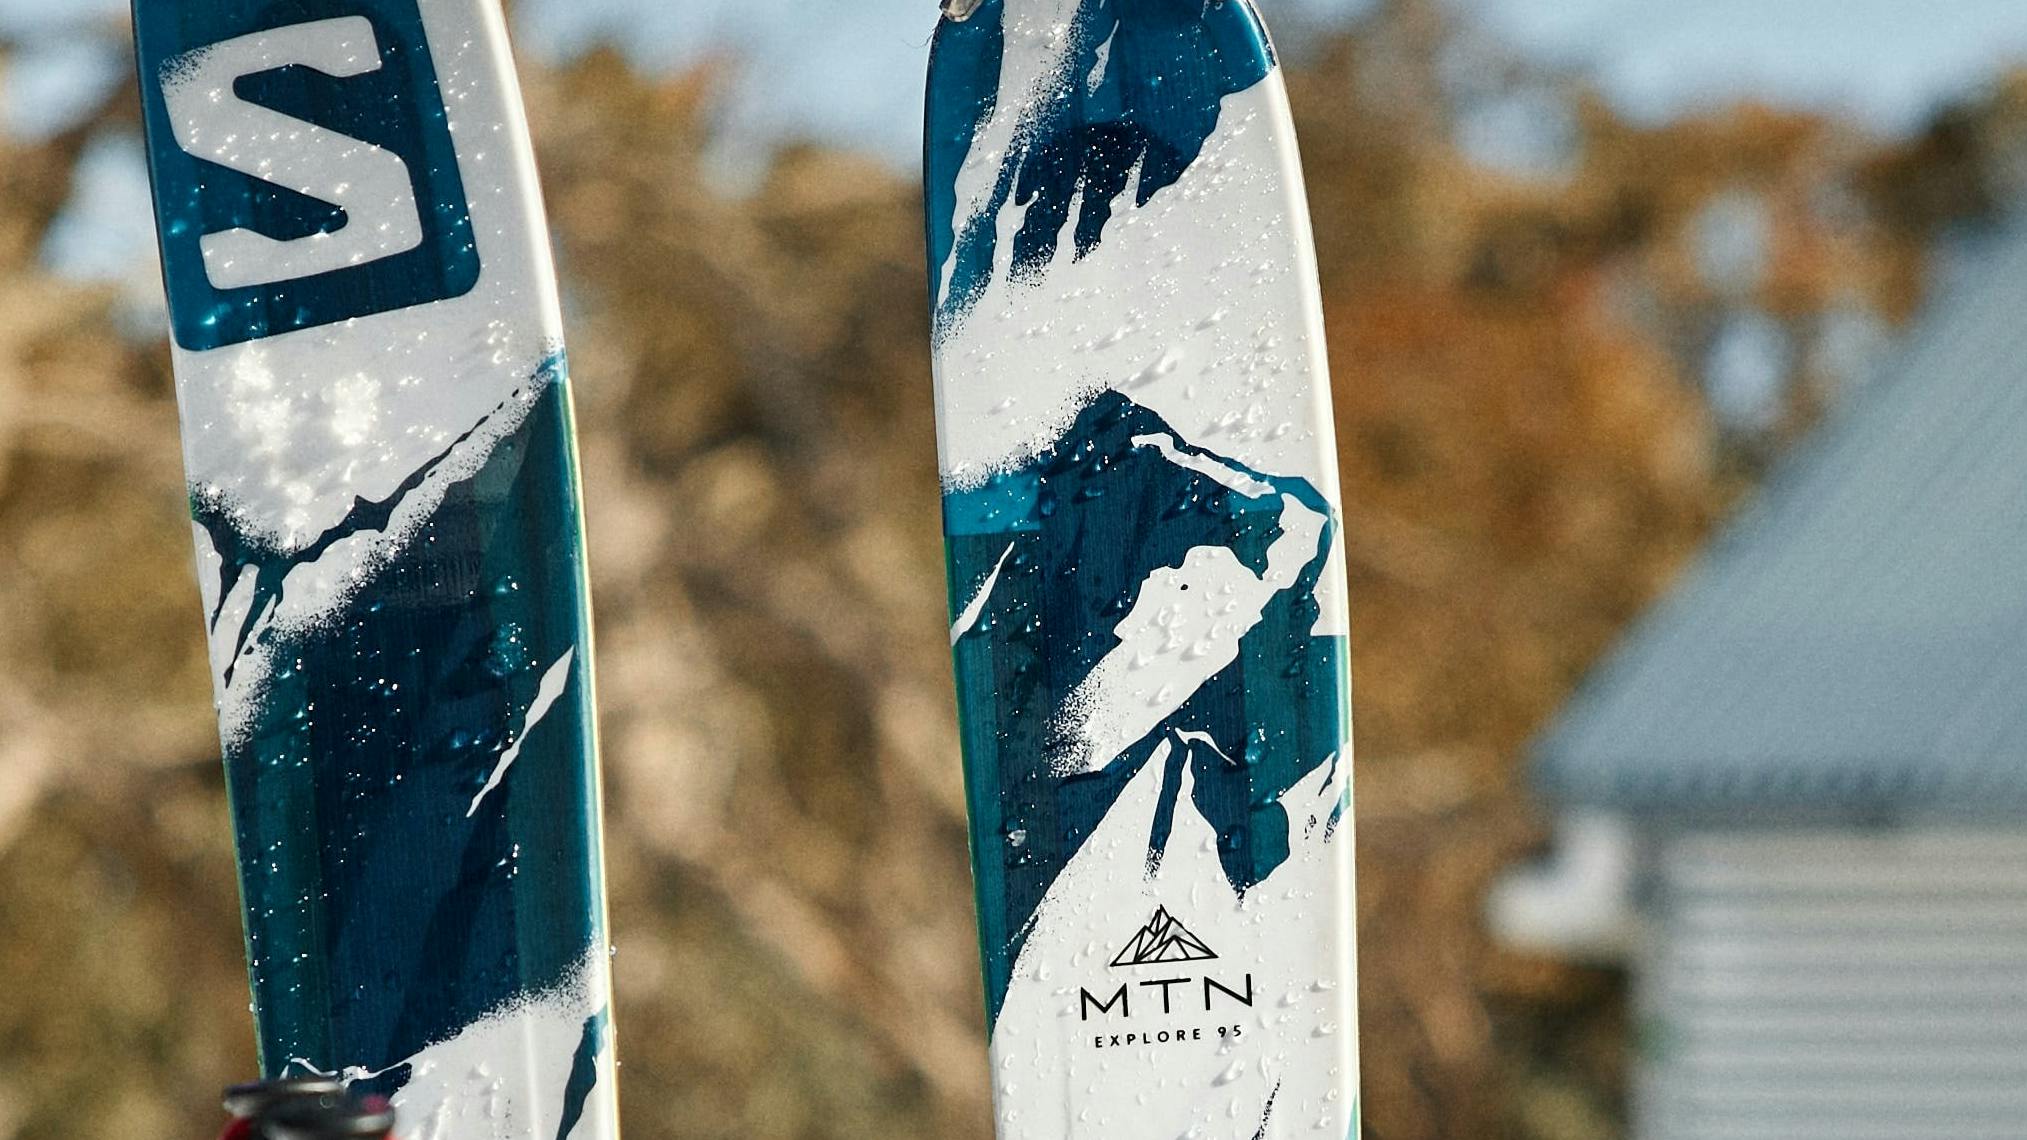 A pair of Salomon skis sticking in the snow. 